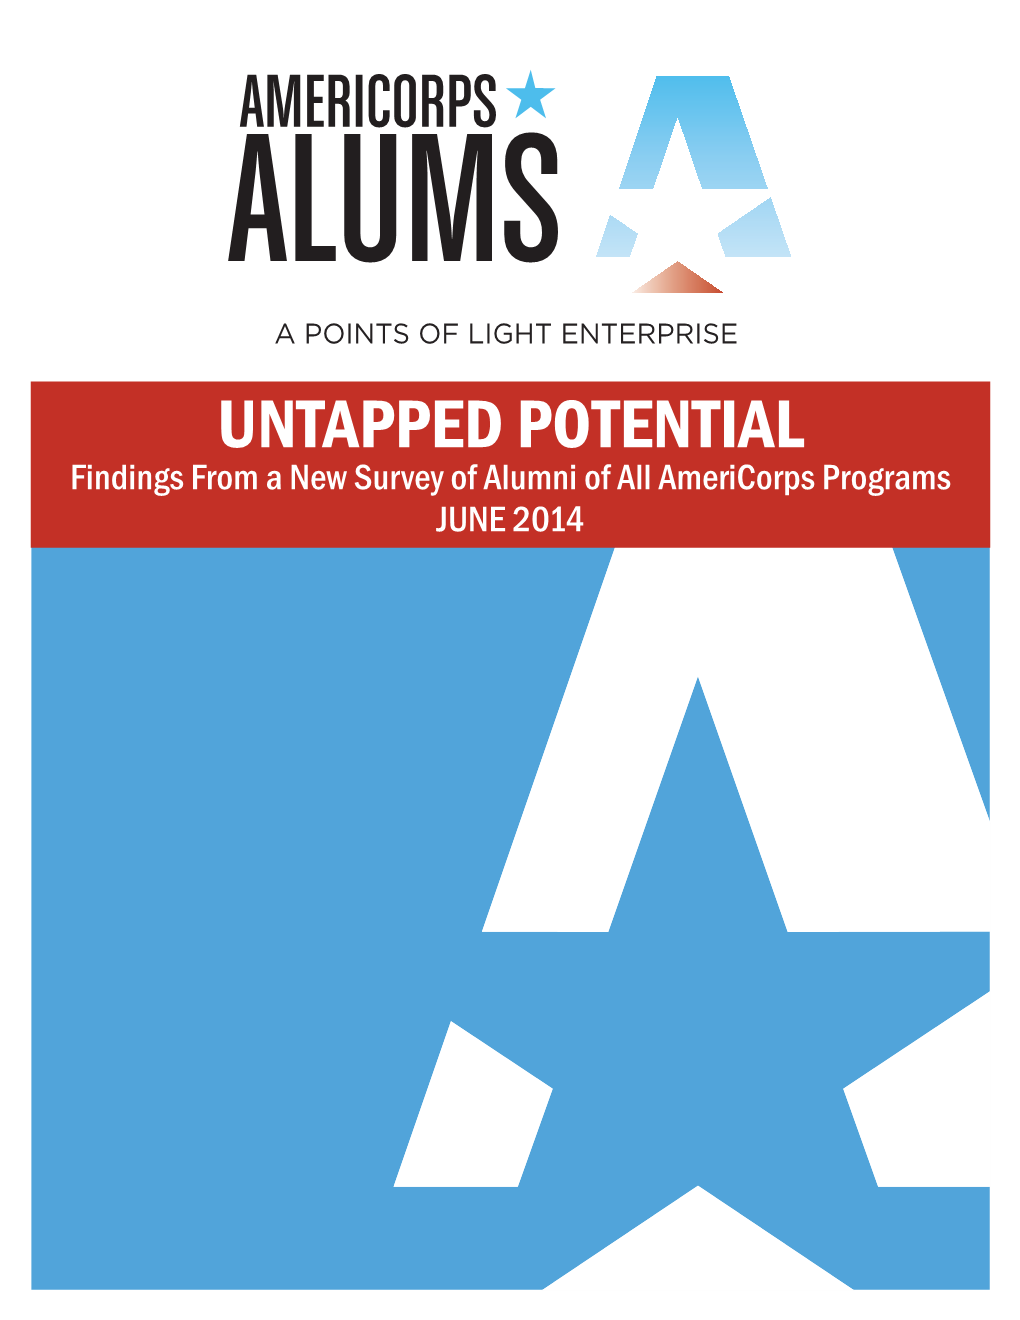 UNTAPPED POTENTIAL Findings from a New Survey of Alumni of All Americorps Programs JUNE 2014 FINDINGS from a NEW SURVEY of ALUMNI of ALL AMERICORPS PROGRAMS